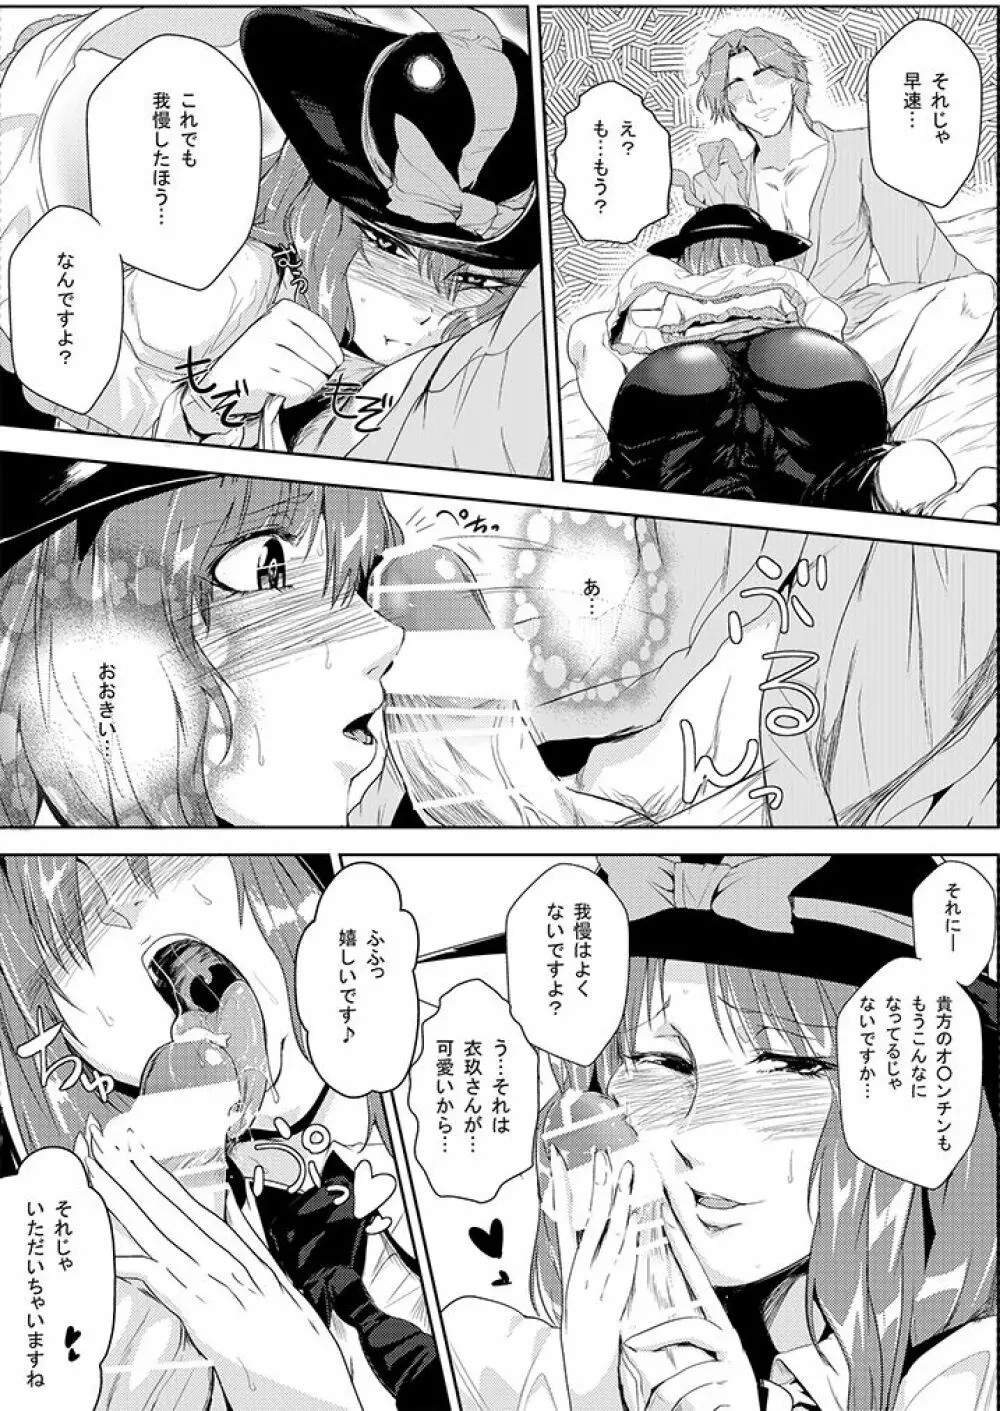 SAKUYA MAID in HEAVEN/ALL IN 1 - page421